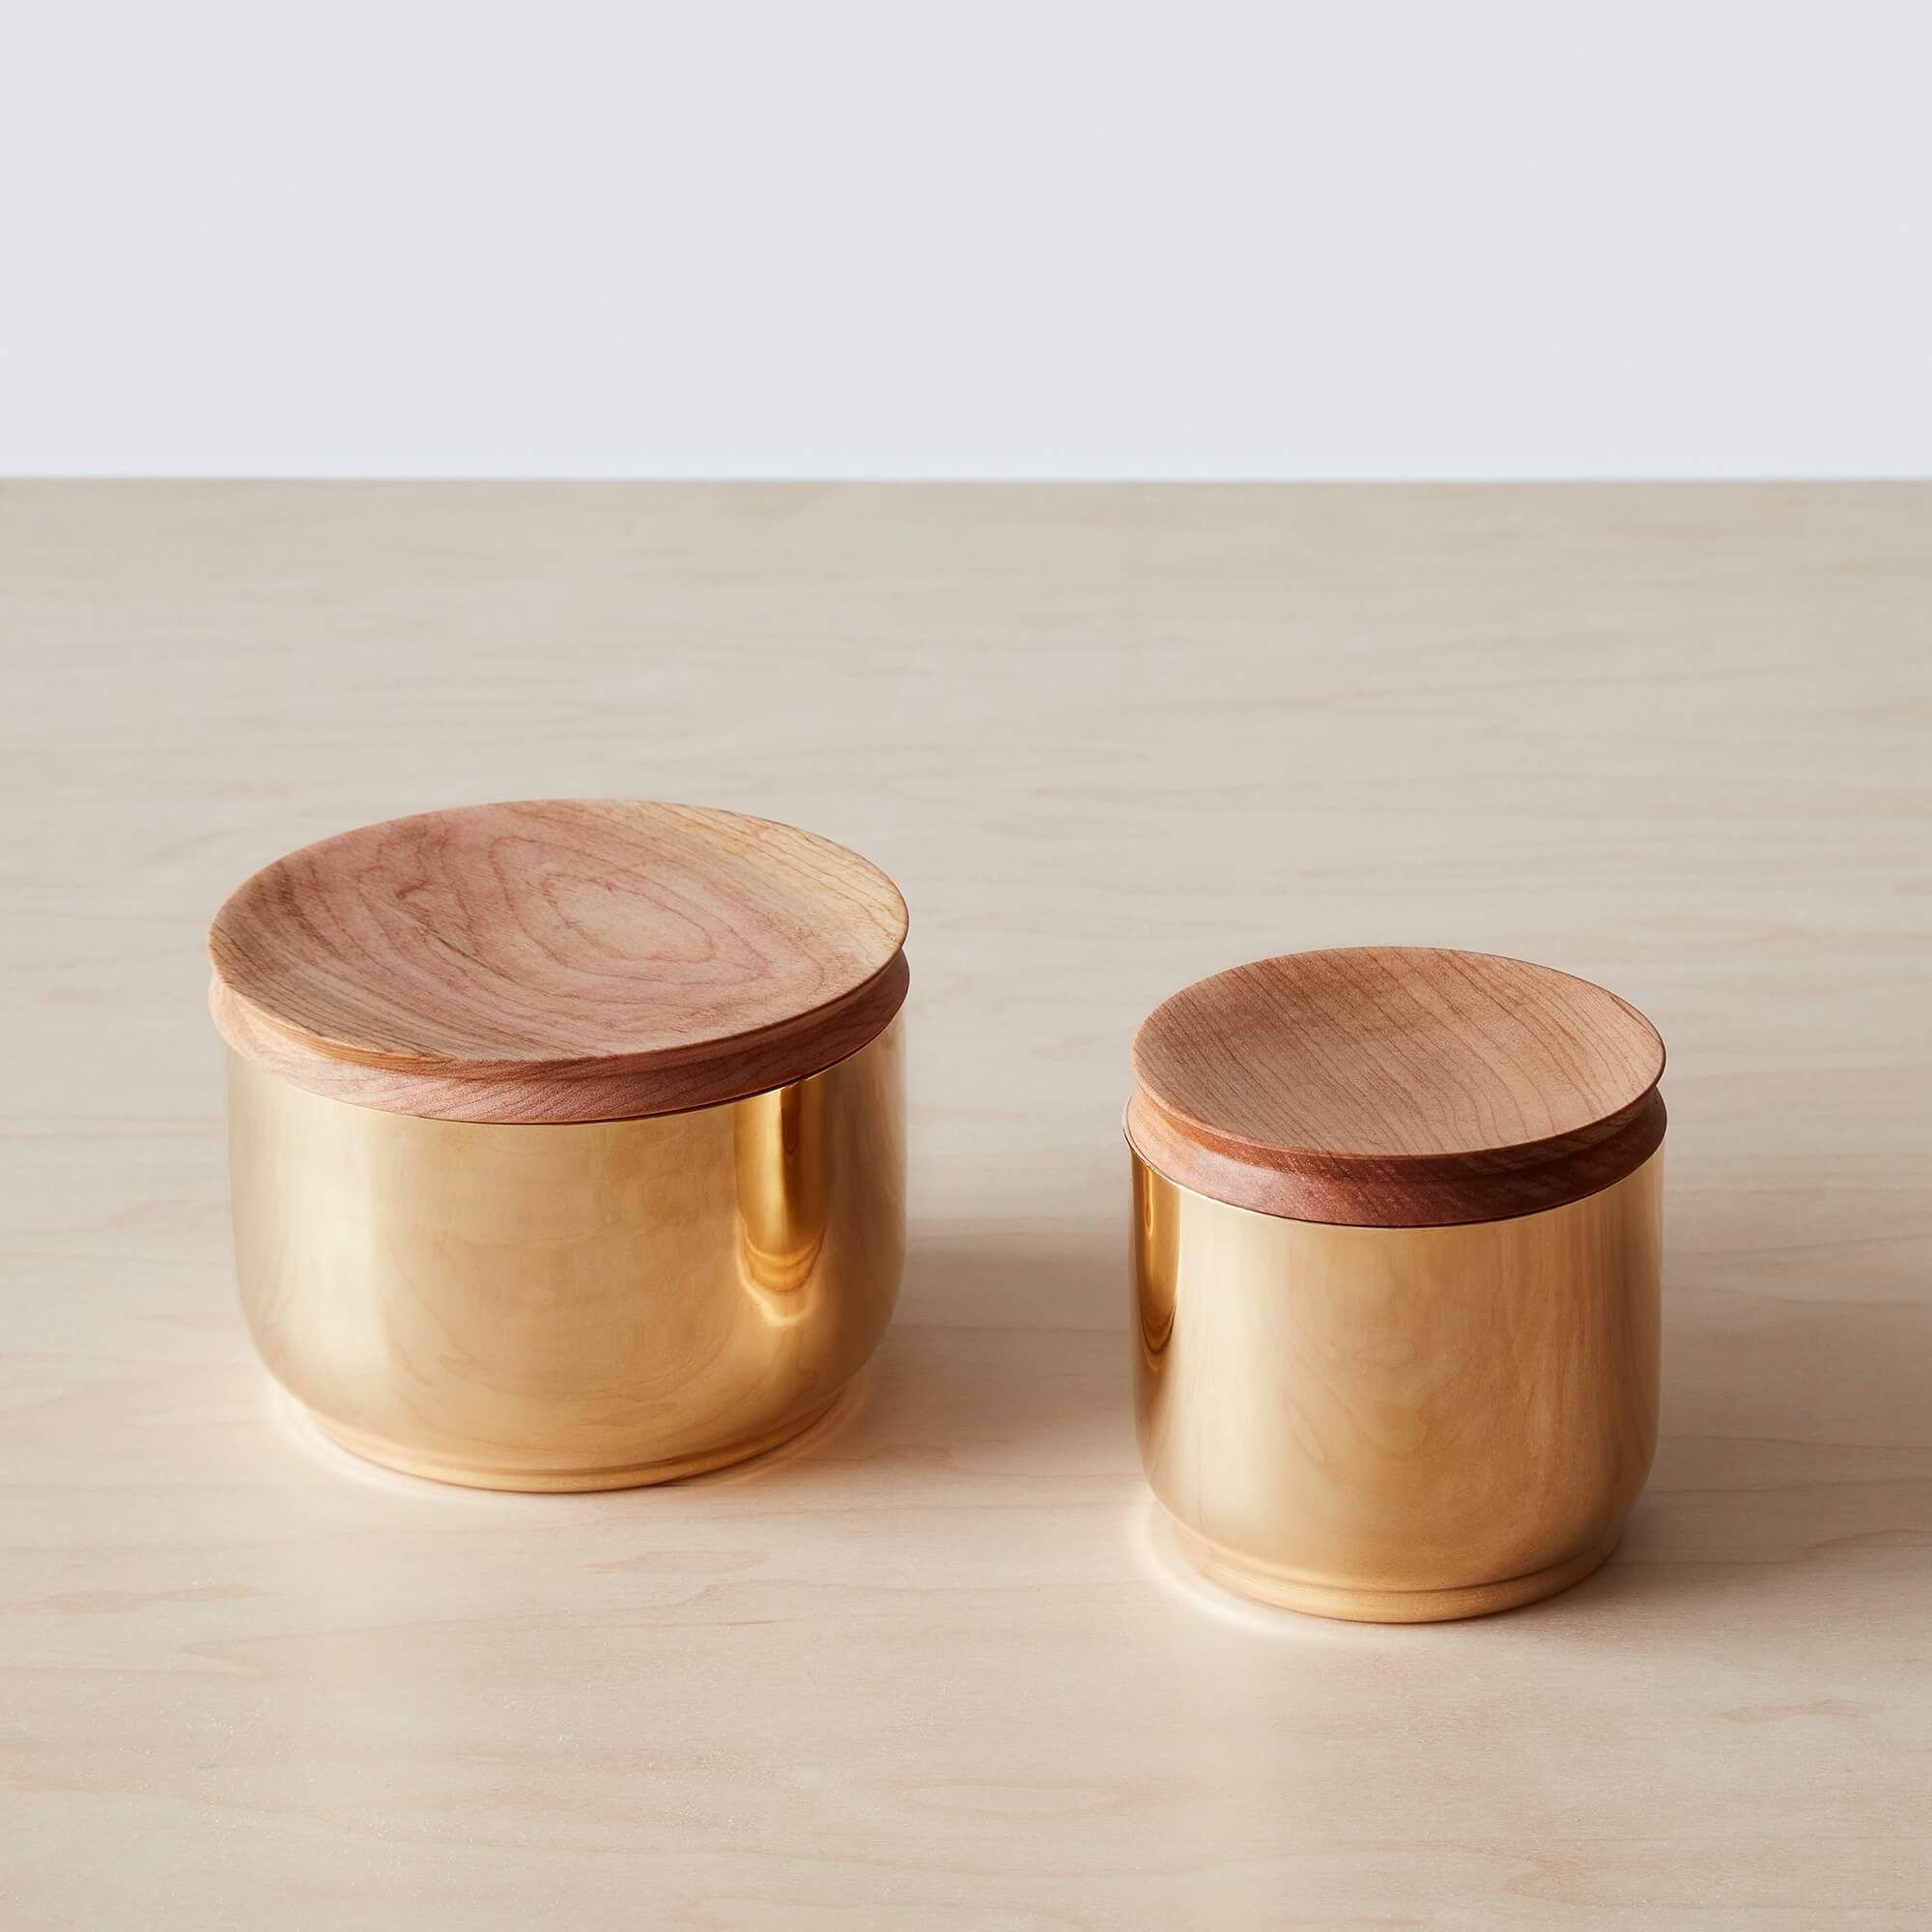 Las Condes Bronze Containers - Set of 2 | The Citizenry